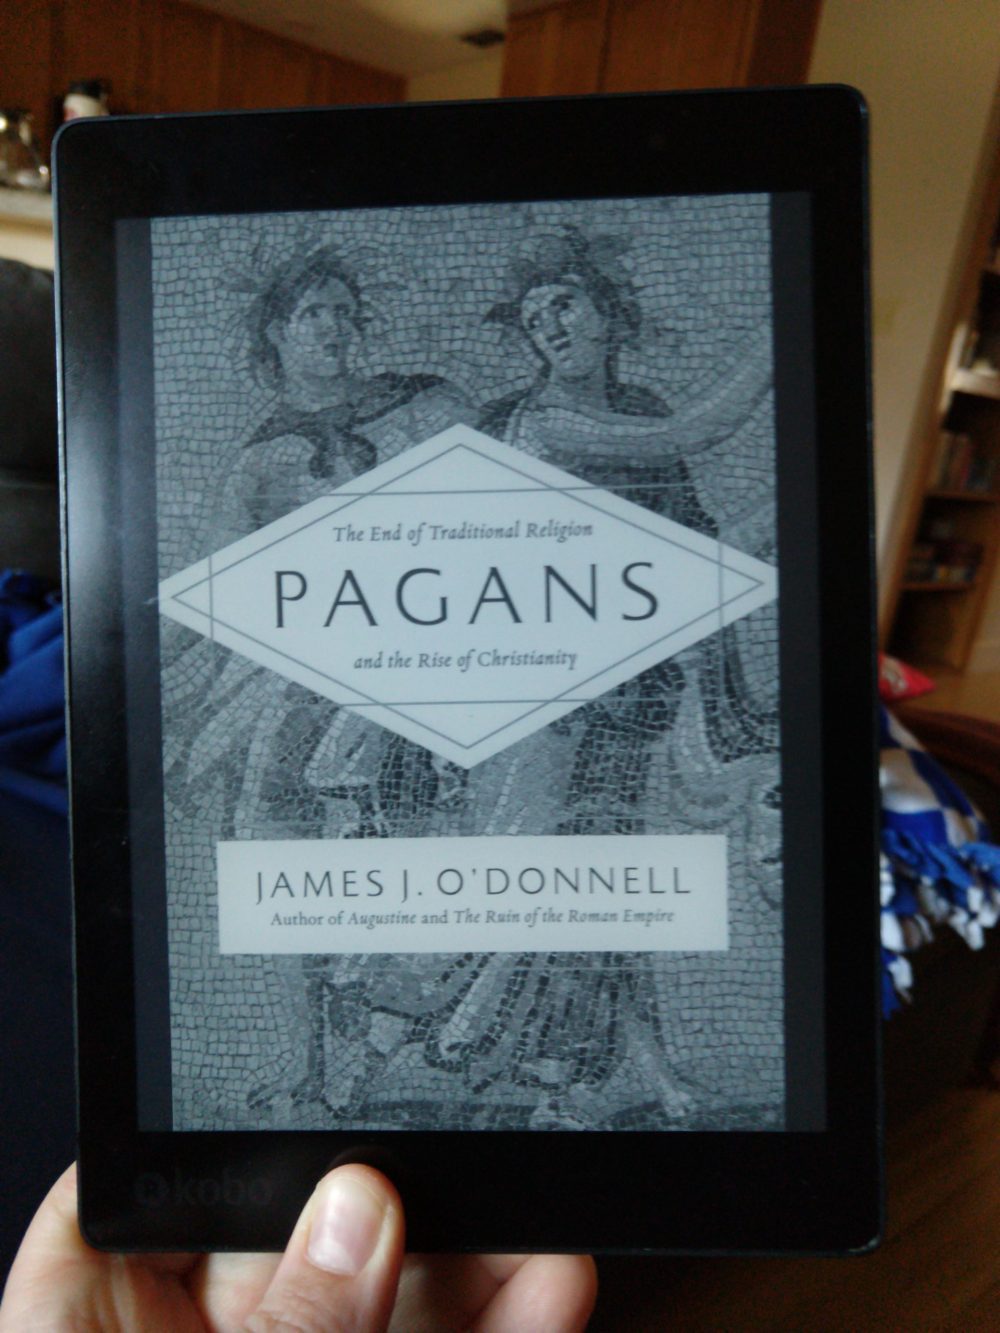 ebook cover shown on kobo ereadeR: Pagans: The End of Traditional Religion and the Rise of Christianity